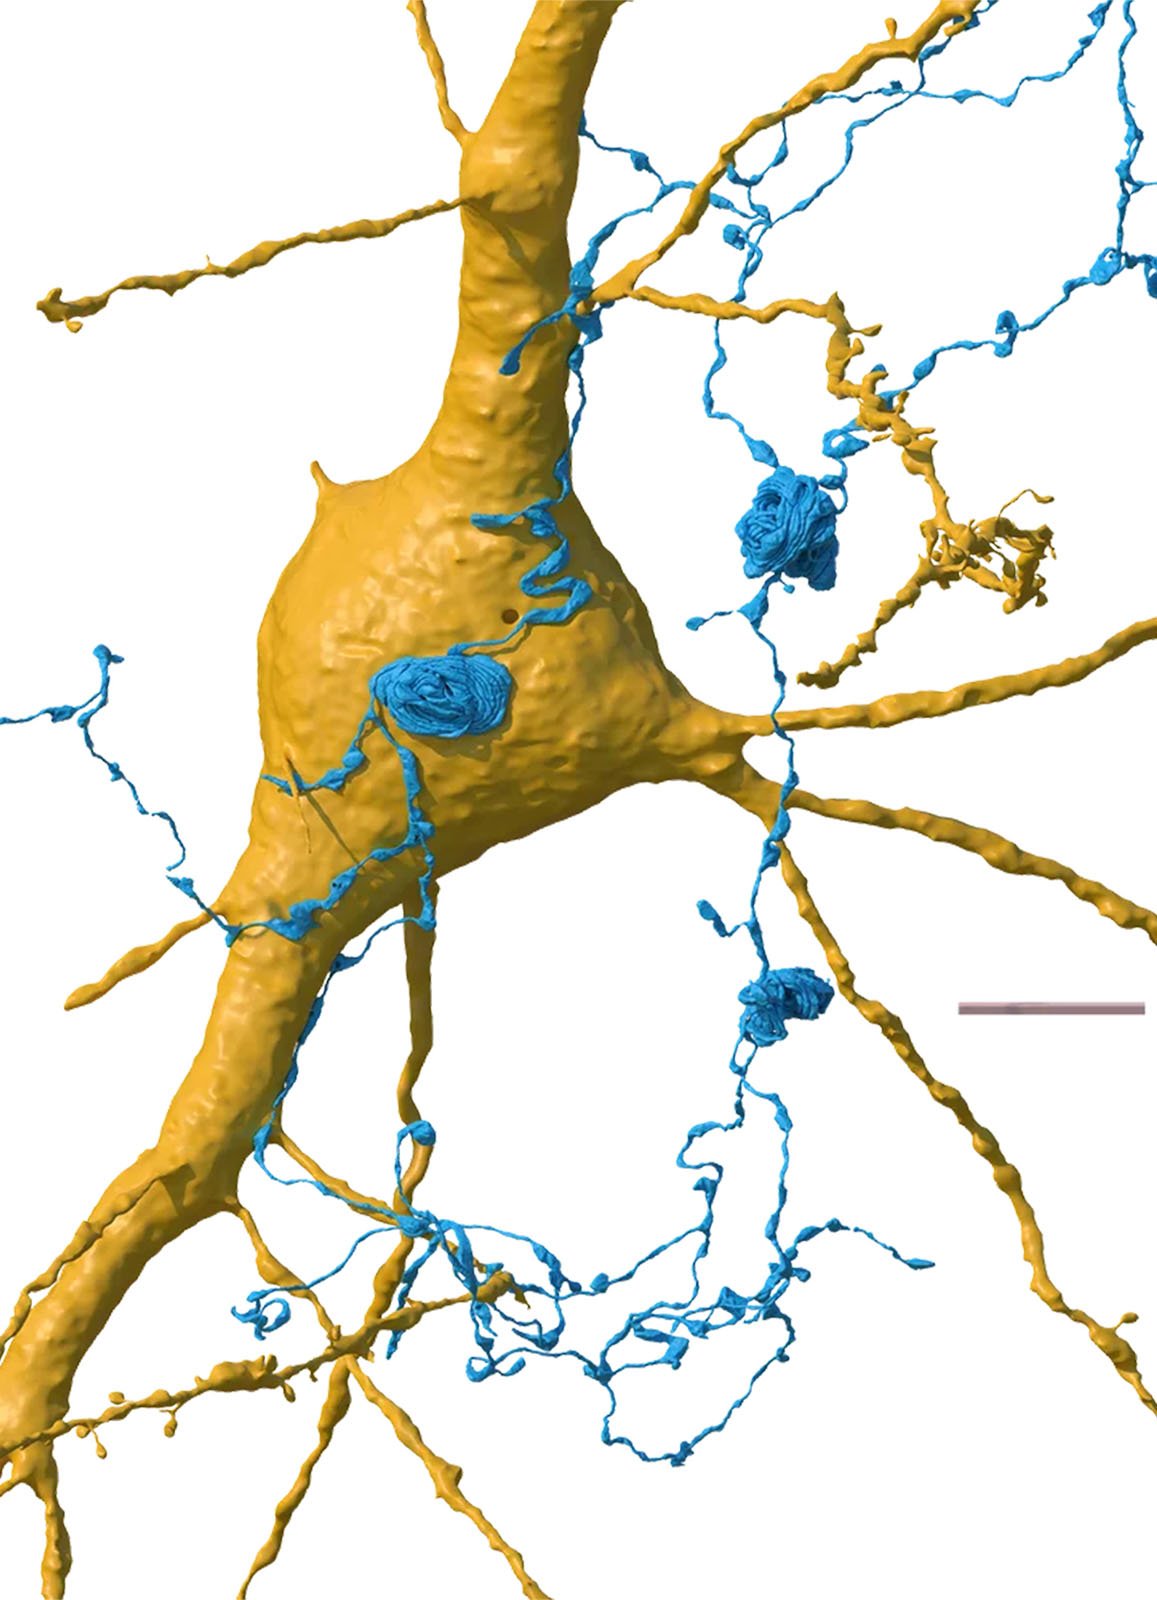 3D rendered image of a neuron with detailed dendrites colored in yellow and blue synapses, showcasing the intricate network of neural connections. Scale bar at the bottom right indicates size.